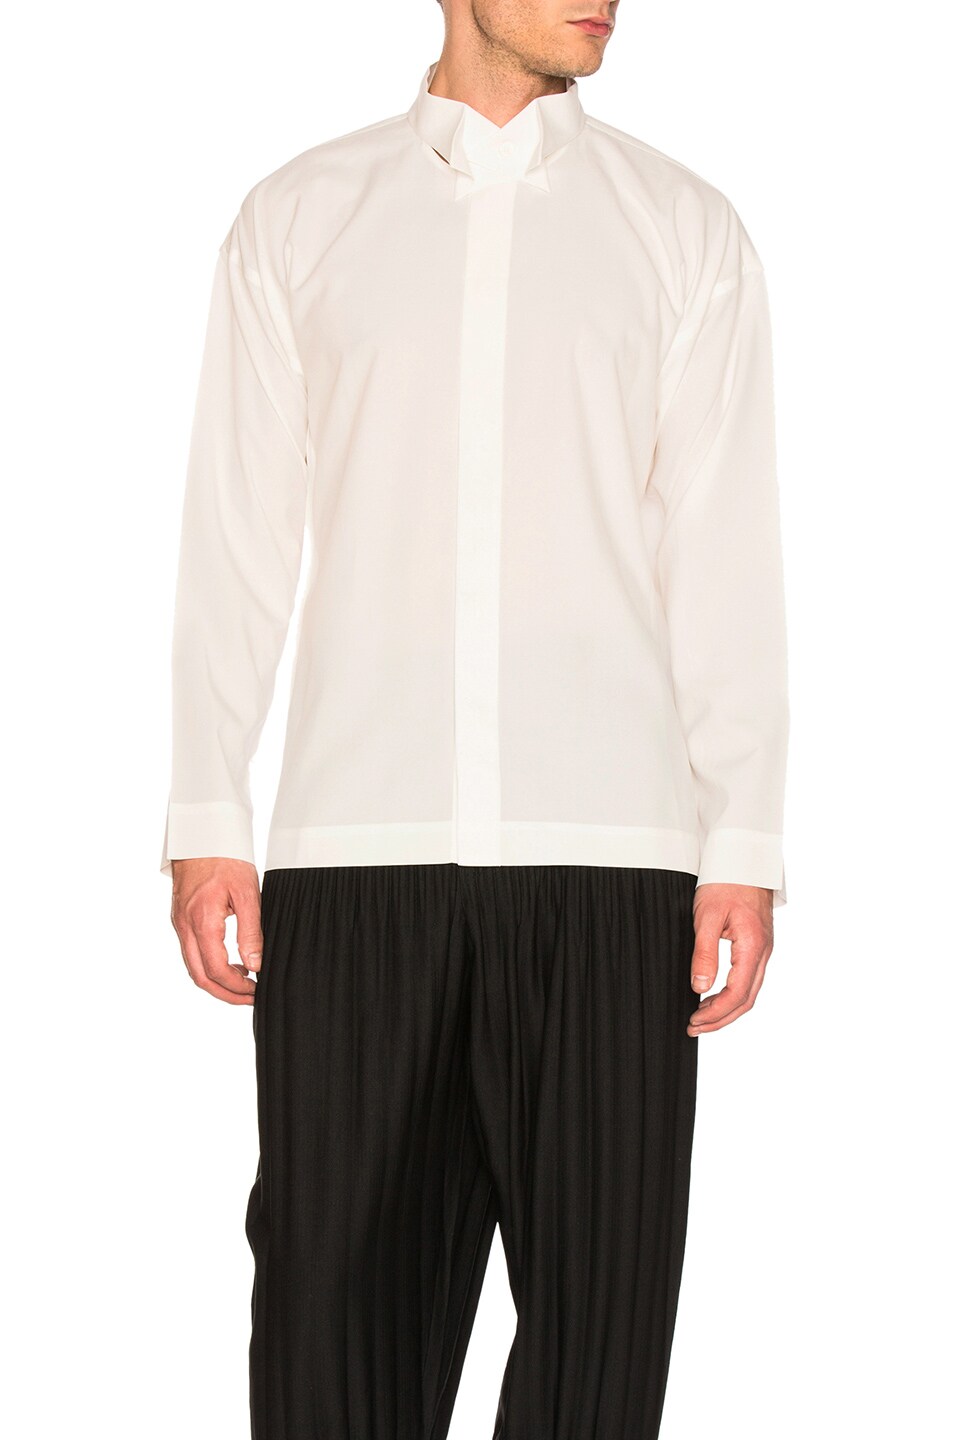 Image 1 of Homme Plisse Issey Miyake Bow Tie Press Shirt in White